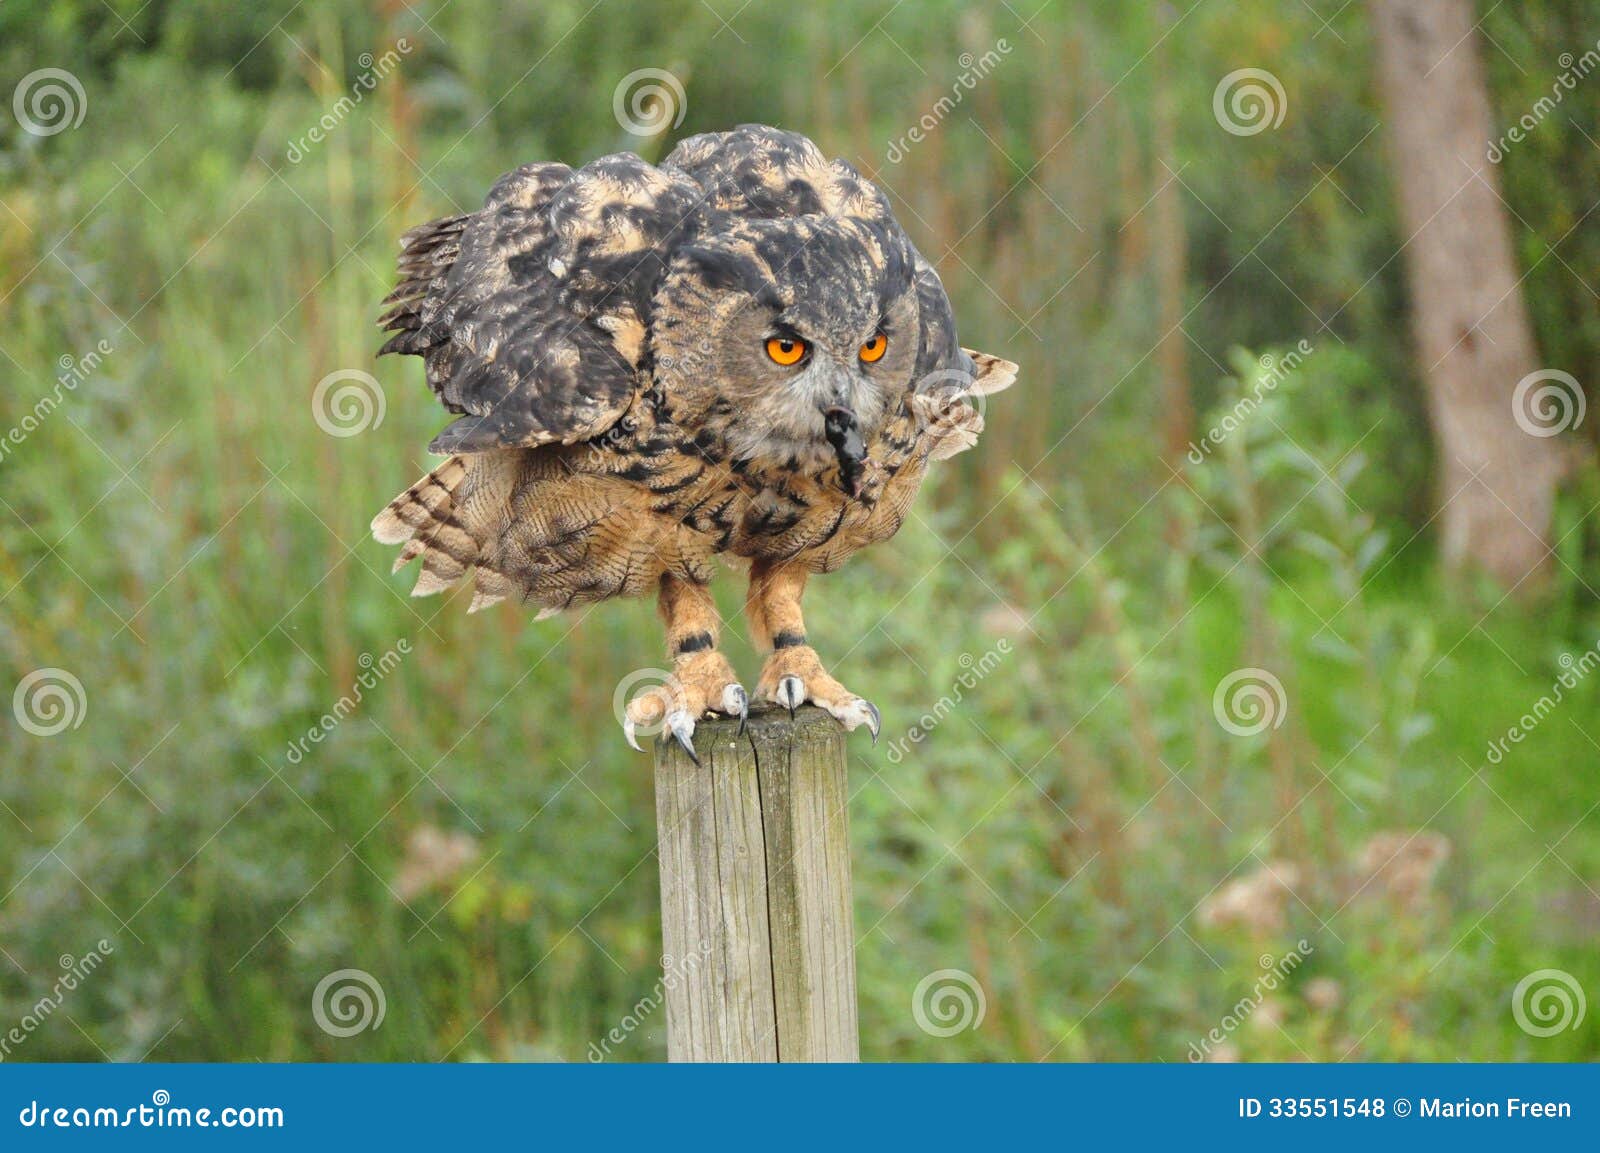 owl eating a mouse